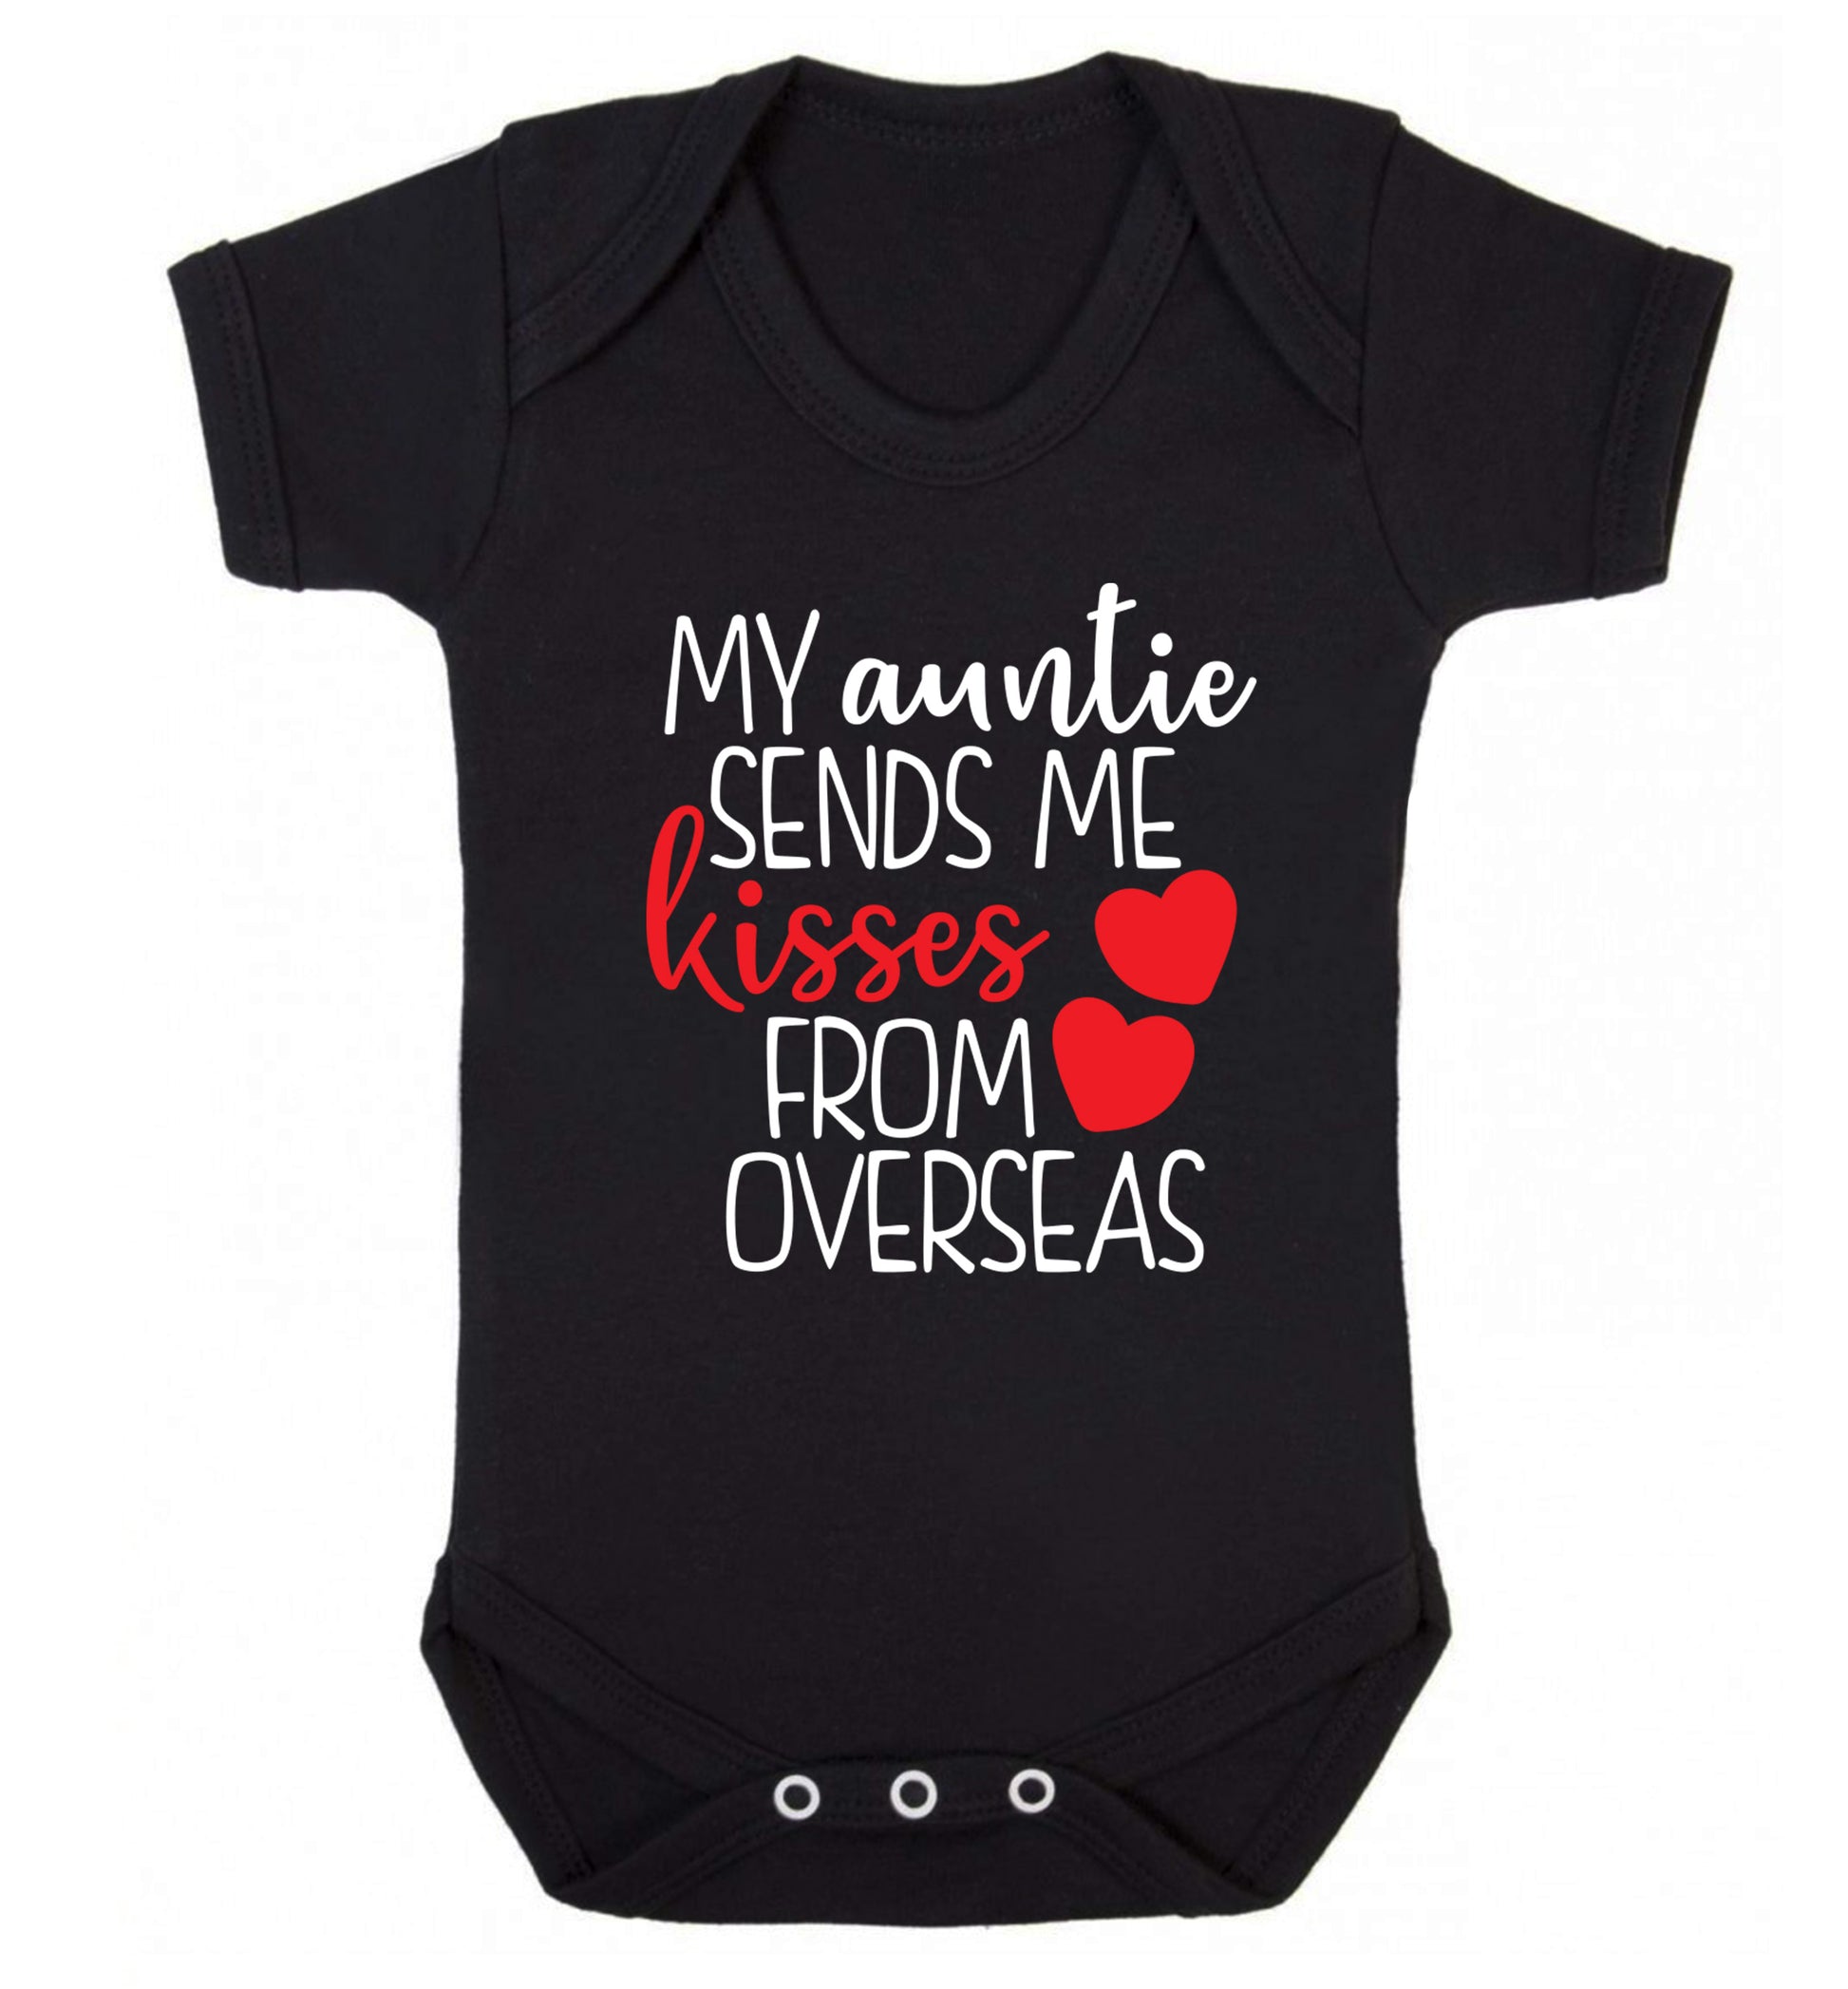 My auntie sends me kisses from overseas Baby Vest black 18-24 months